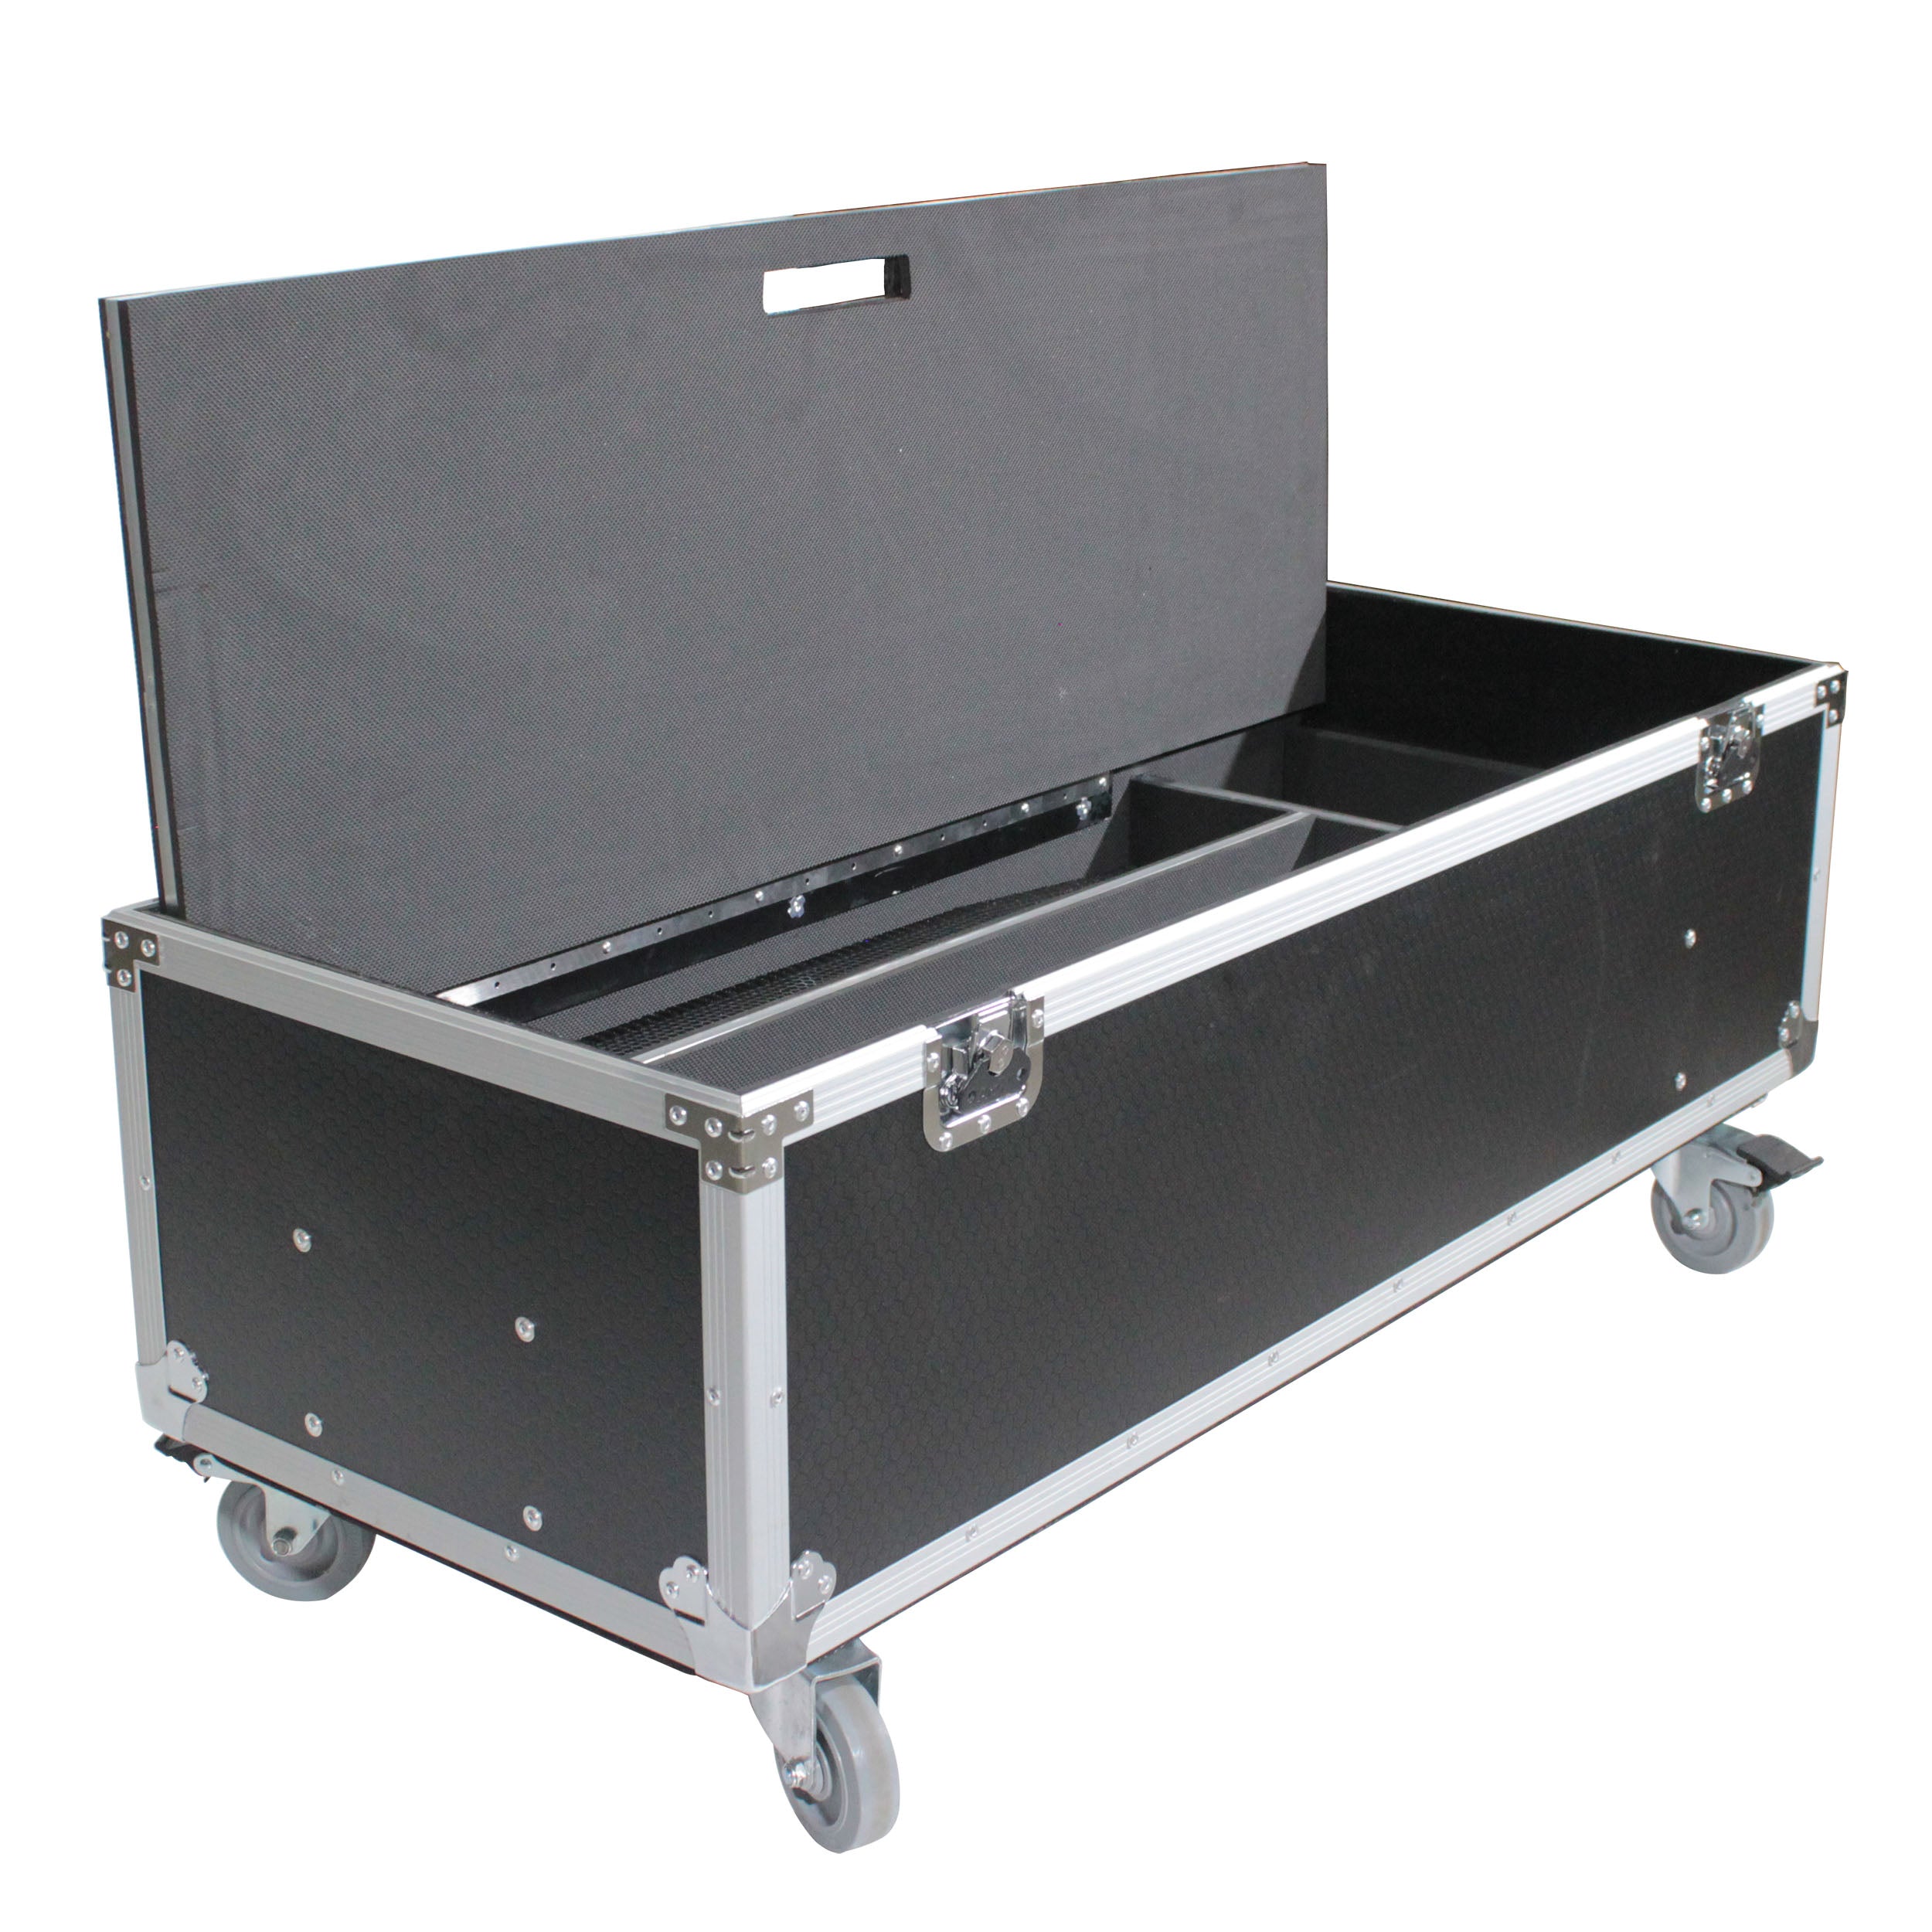 Pro X ATA Flight Case for 2x LD System Maui 44G2 Compact Arrays Fits Two Speakers and Subwoofers XS-LDMAUI44X2W